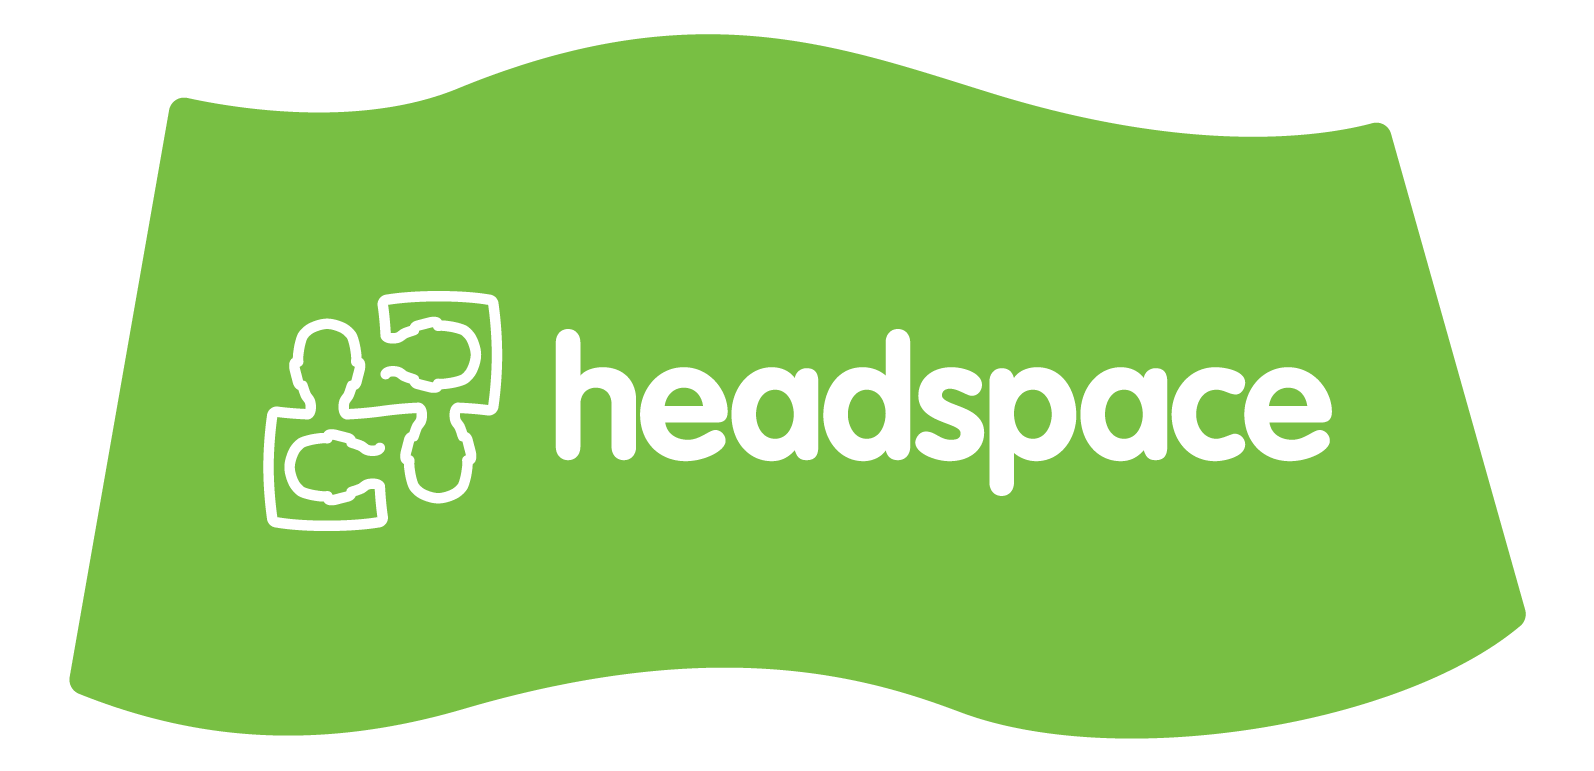 headspace-national-no-tag-logo-in-shape (2).png